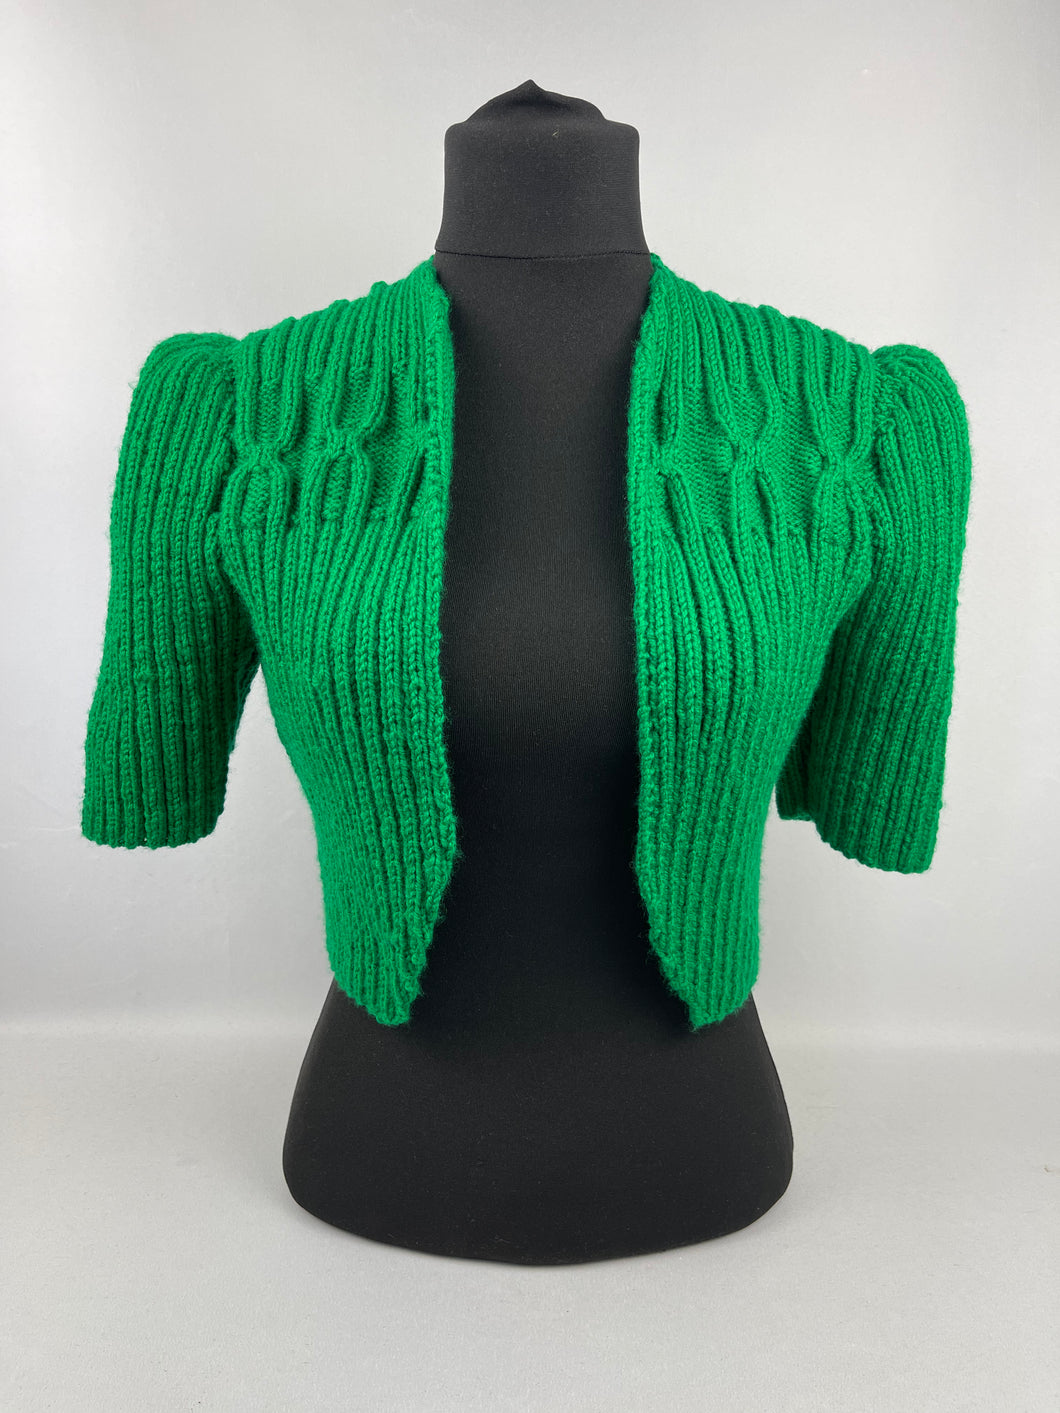 1940's Reproduction Hand Knitted Bolero in Emerald Green - B36 37 38 39 40